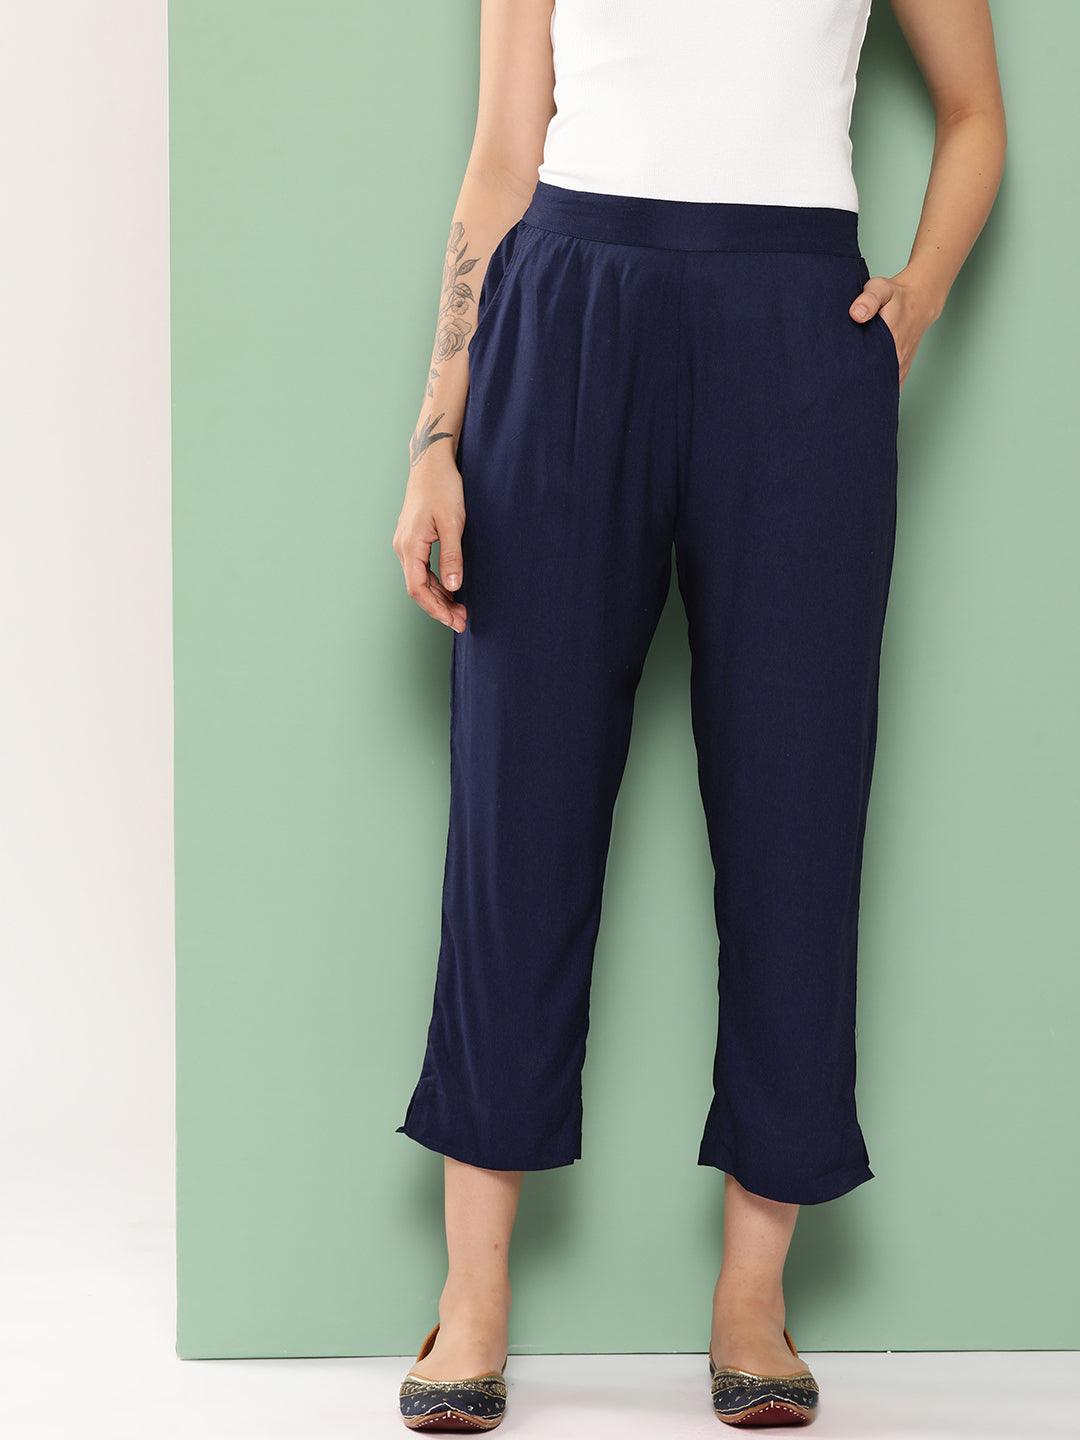 Navy Blue Solid Rayon Trousers